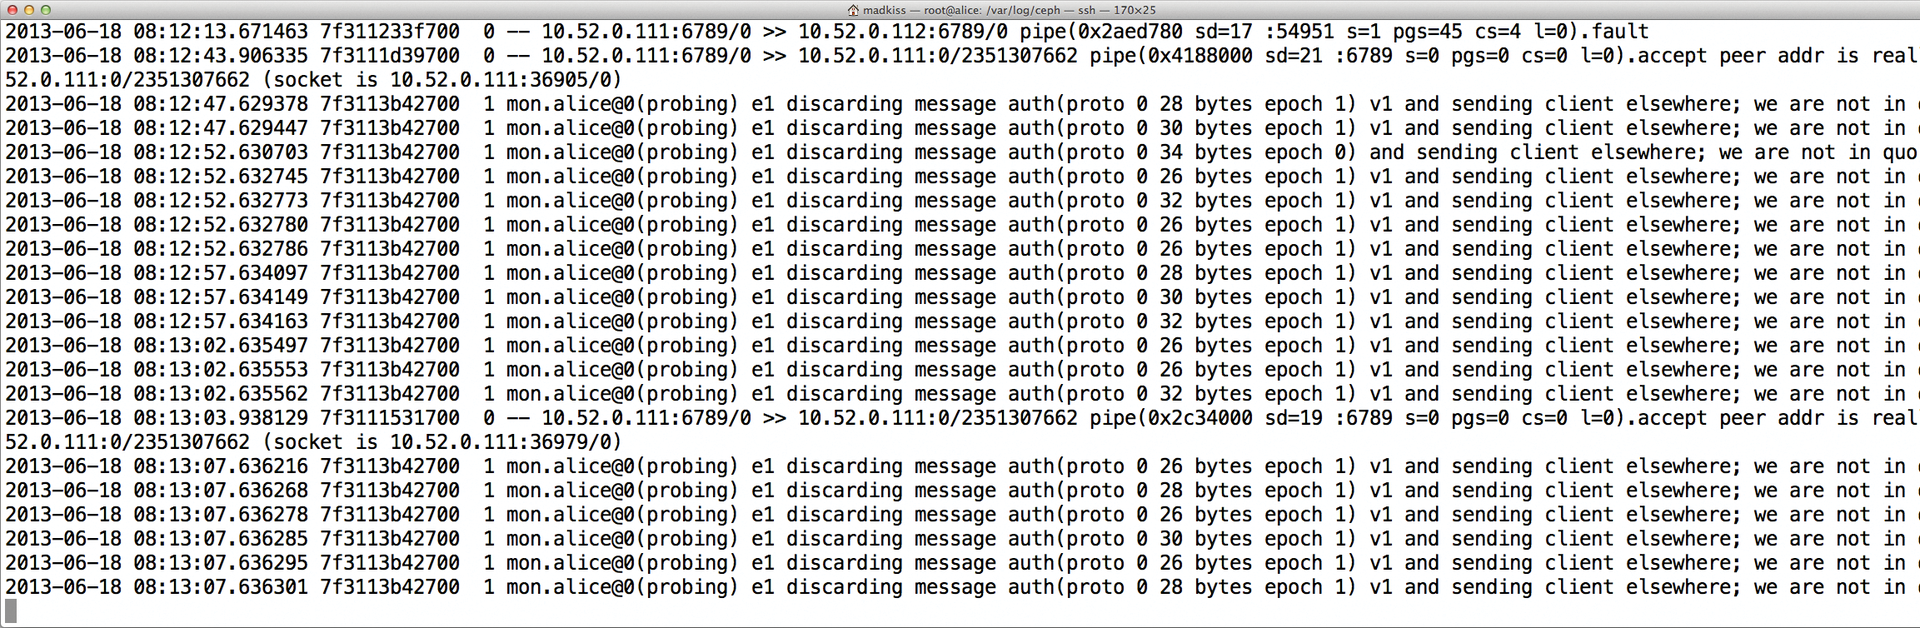 A monitoring server that does not see enough MONs redirects clients that send requests to it. 